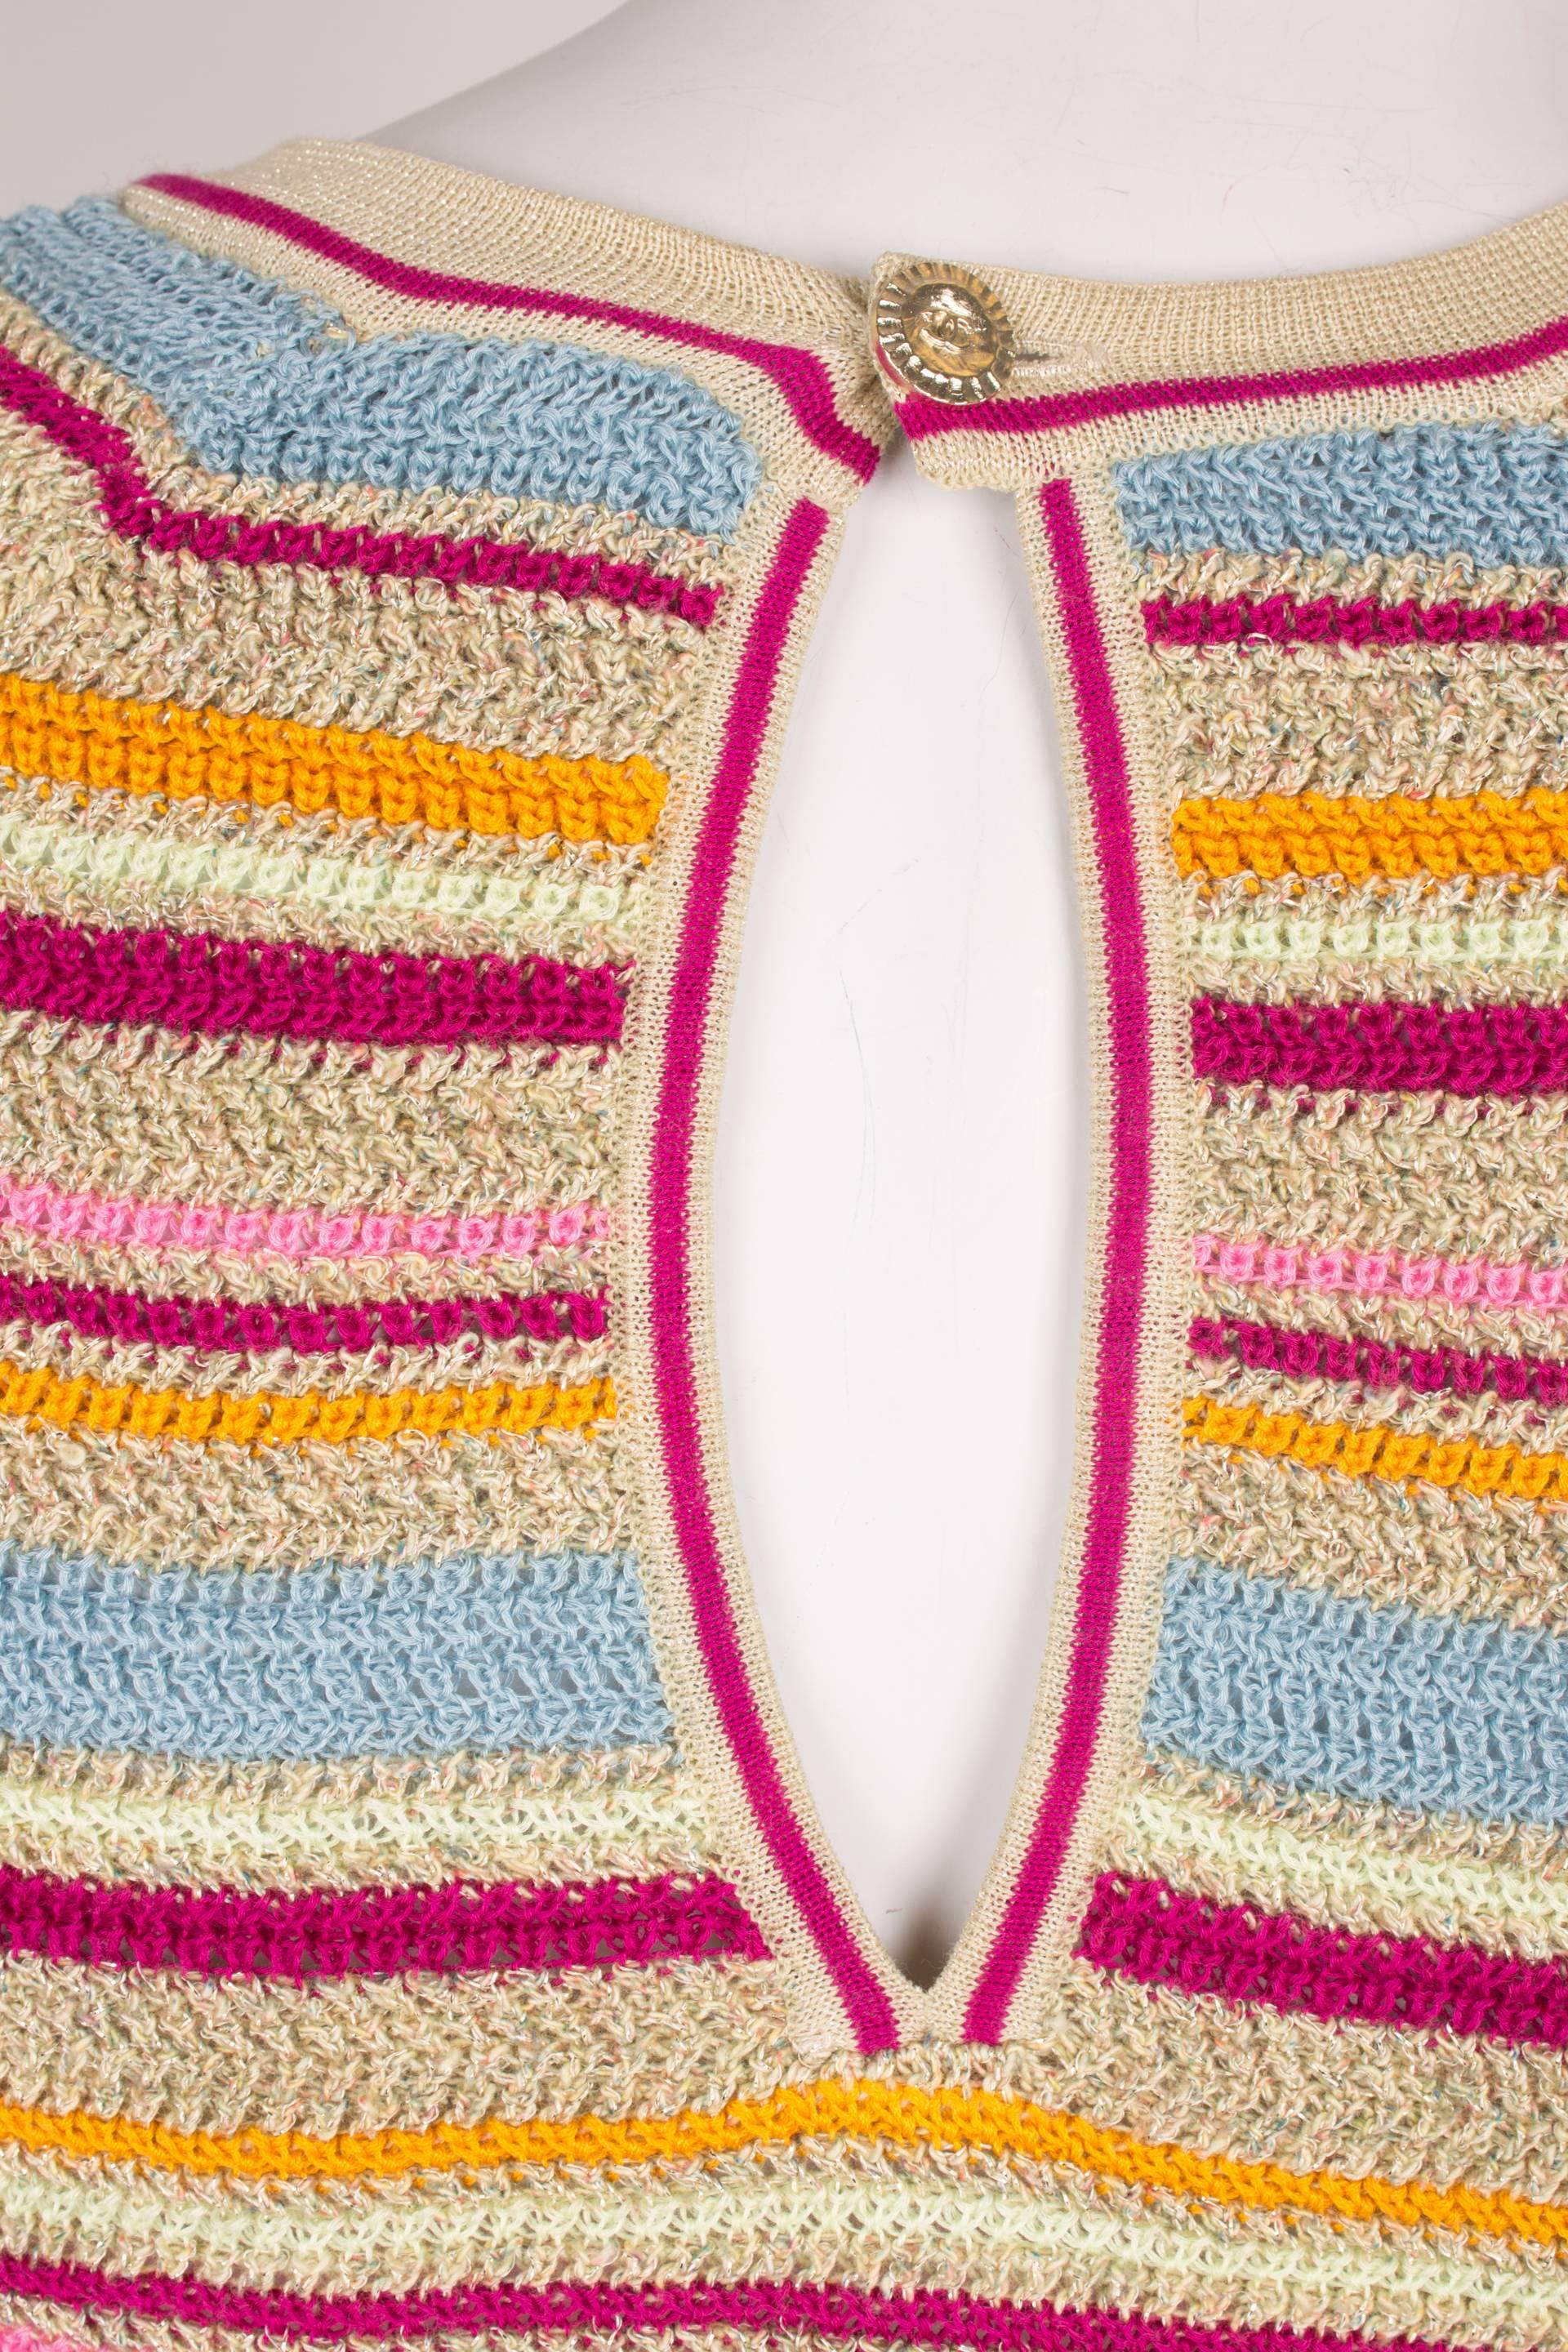 Chanel Tan and Multi-Colored Cotton Knit Short Striped Dress Resort 2011  1